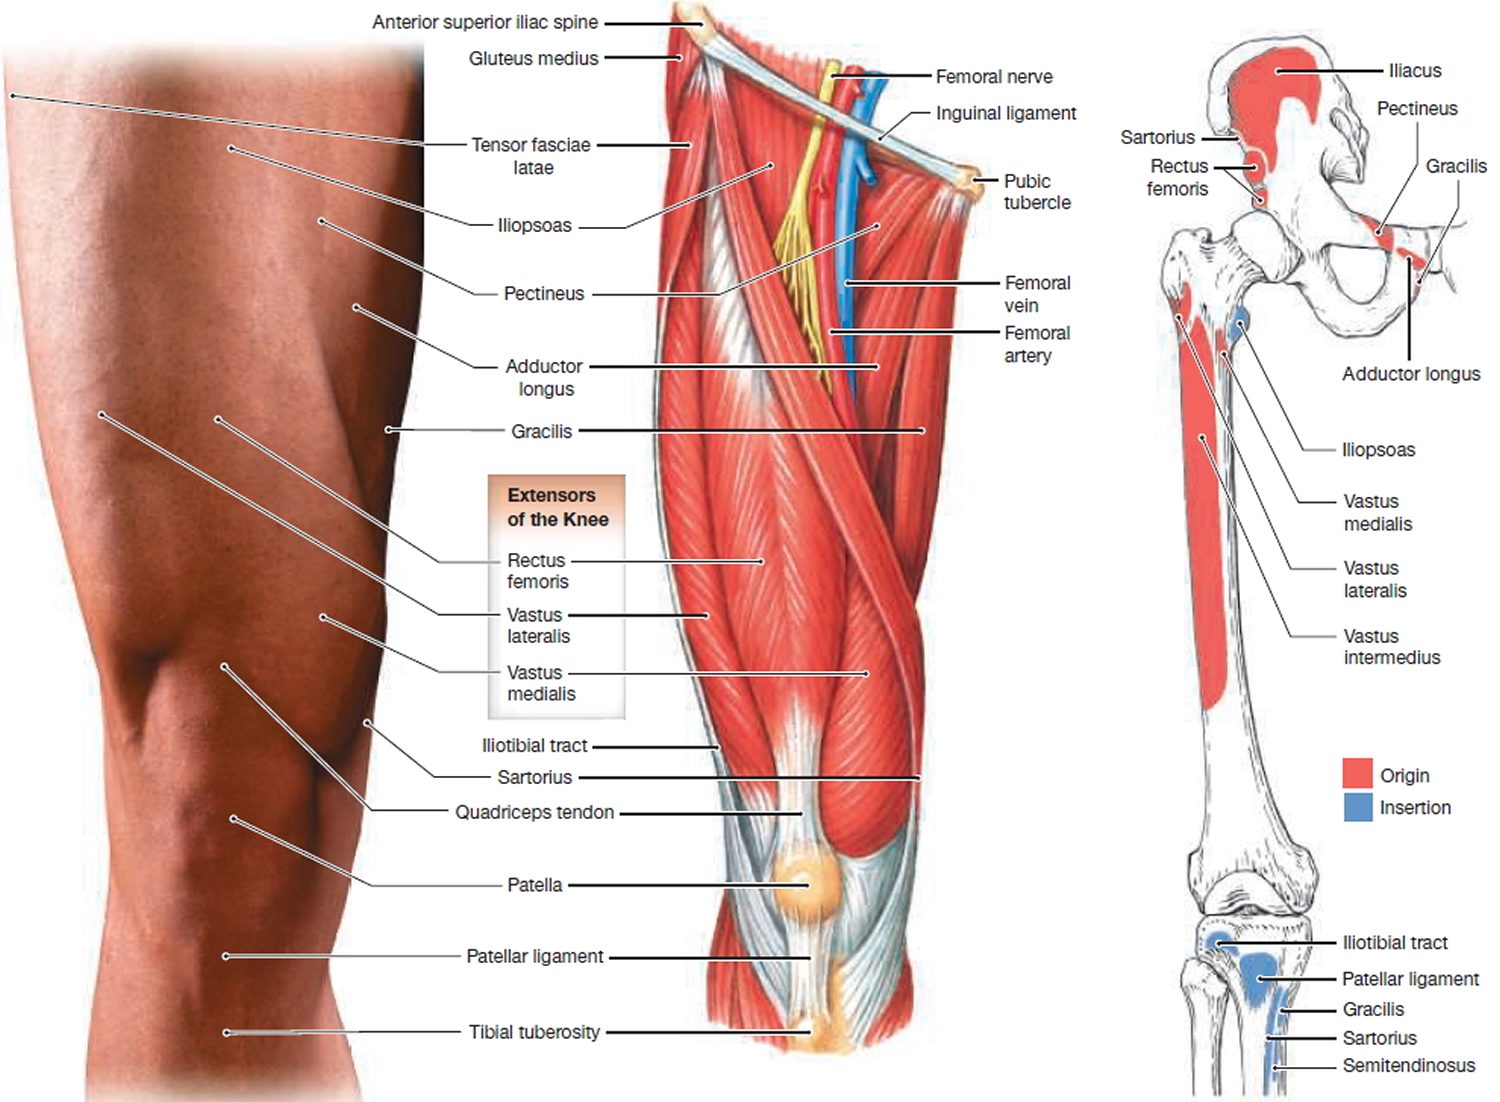 muscles that move the leg